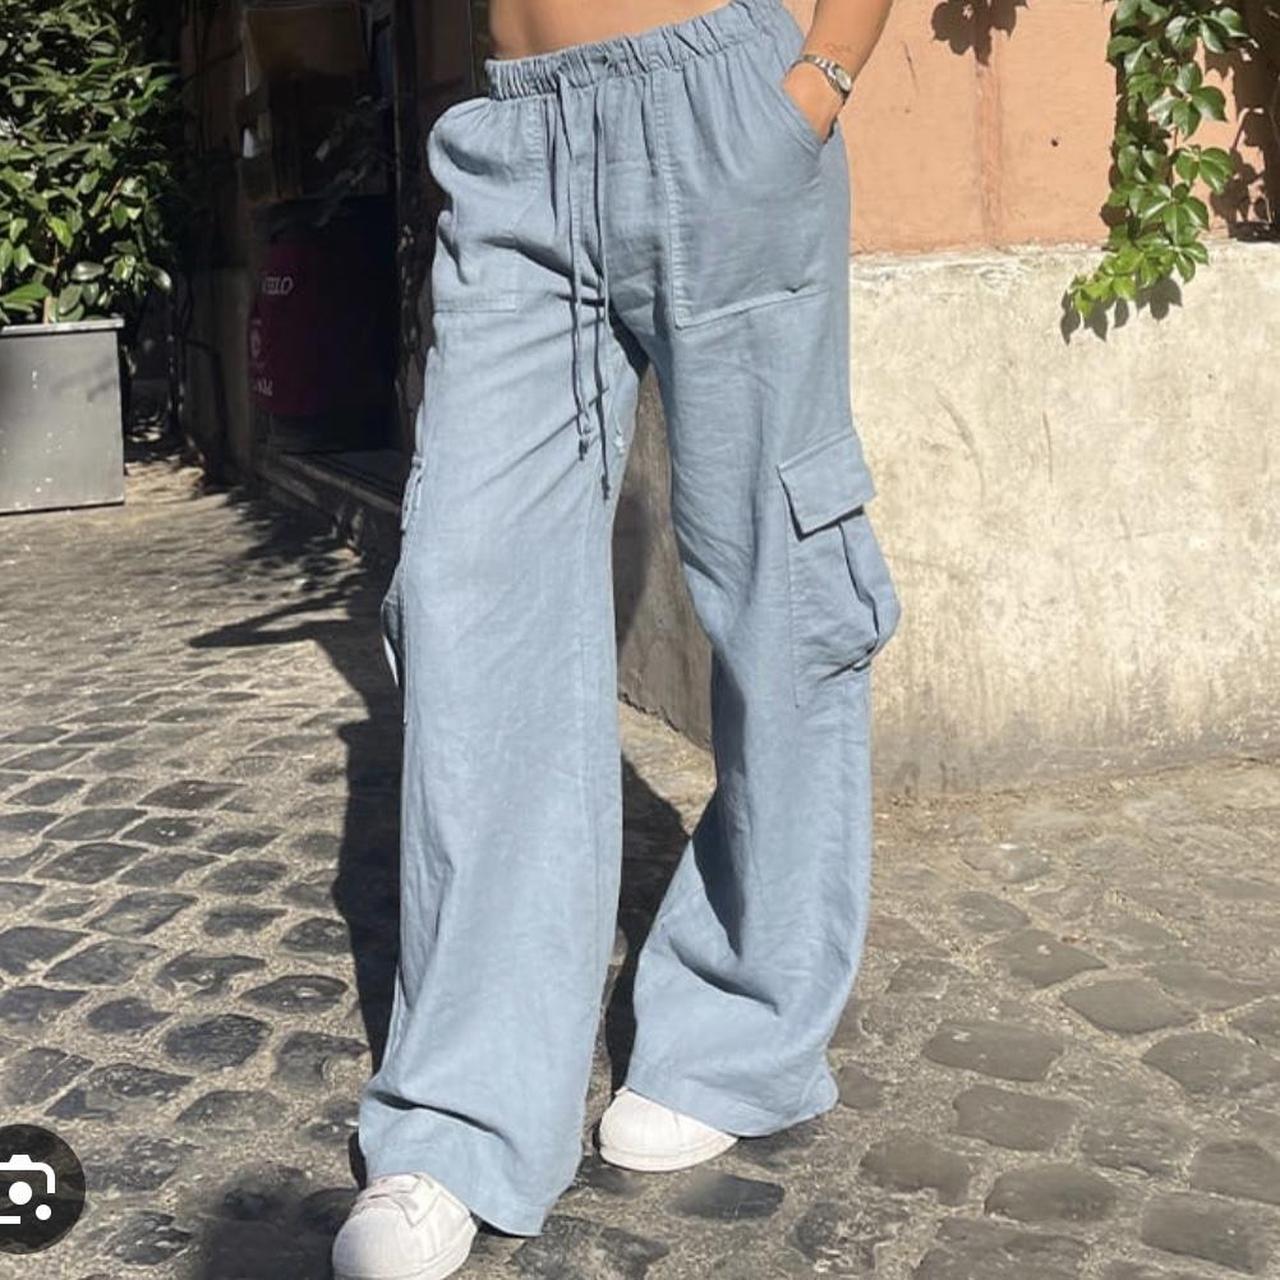 Gorgeous SUBDUED cargo pants in this lovely blue - Depop